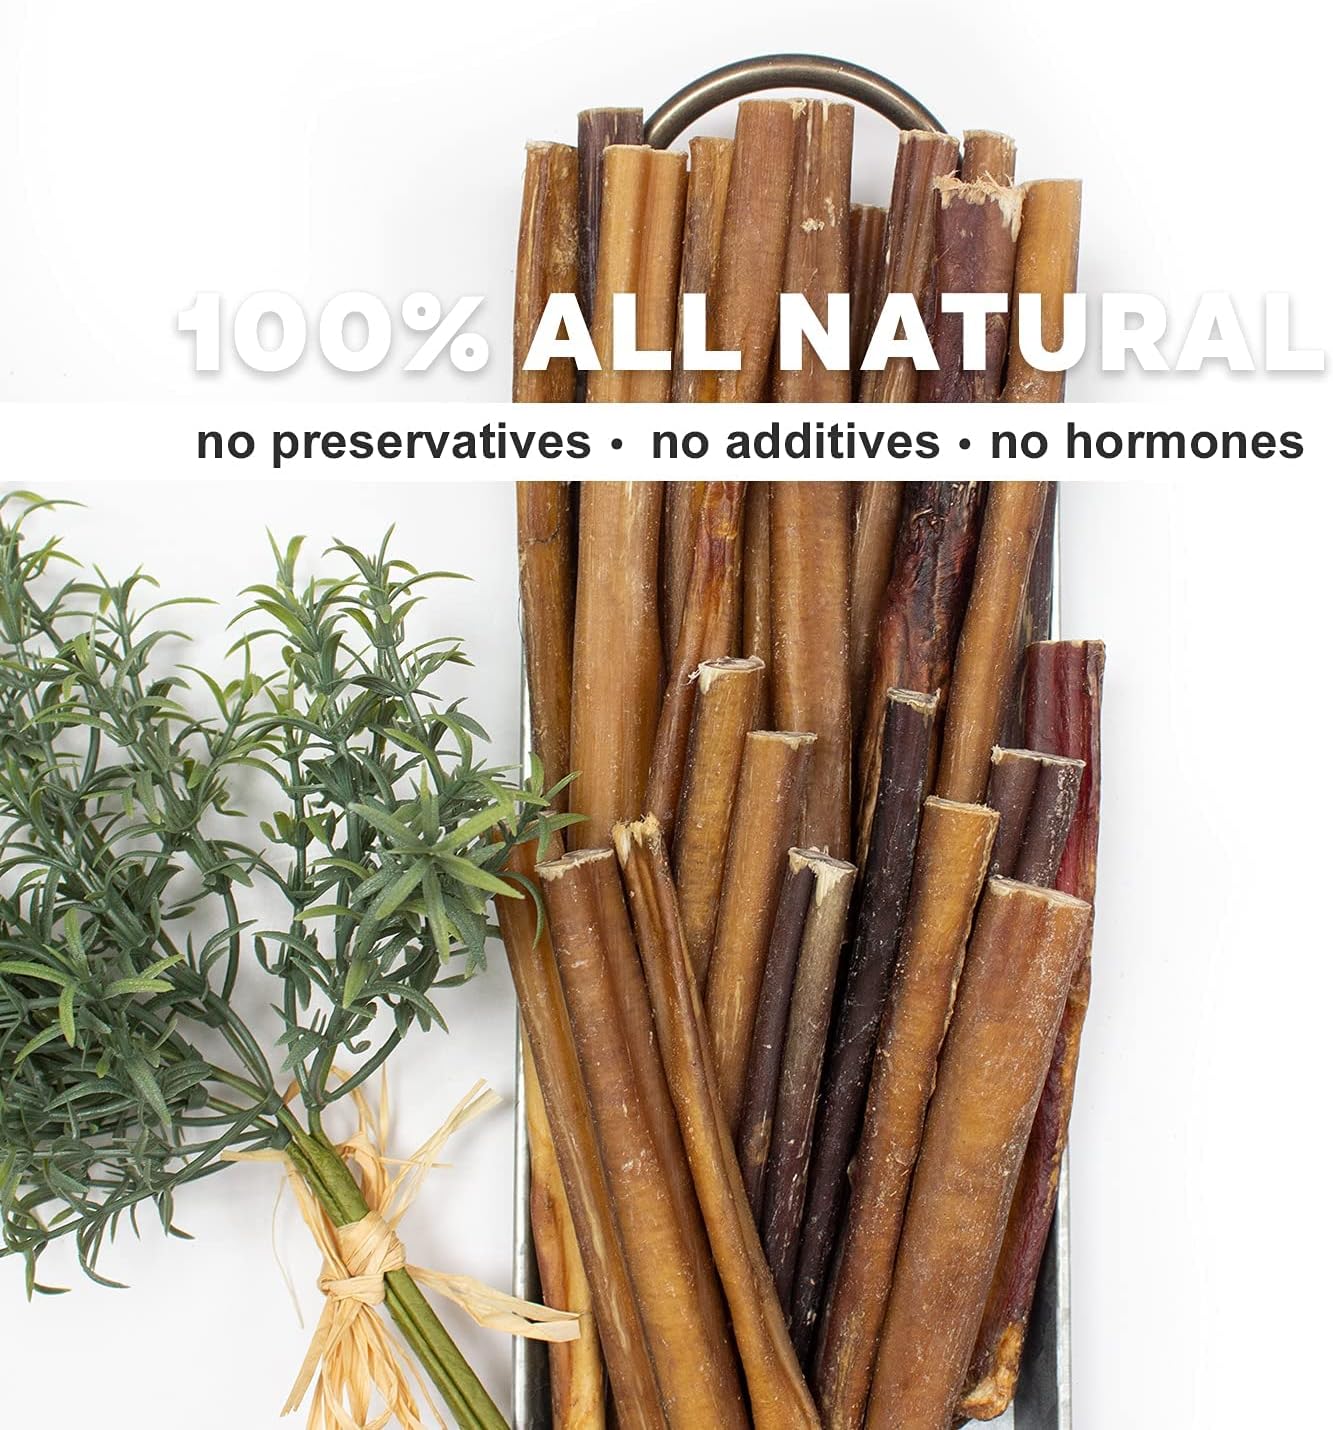 Downtown Pet Supply 6-inch Bully Sticks for Dogs, Pack of 30 - Single Ingredient, Nutrient-Rich and Odor Free Bully Sticks for Dogs - Rawhide Free Dog Chews Long Lasting and Non-Splintering : Pet Rawhide Treat Sticks : Pet Supplies